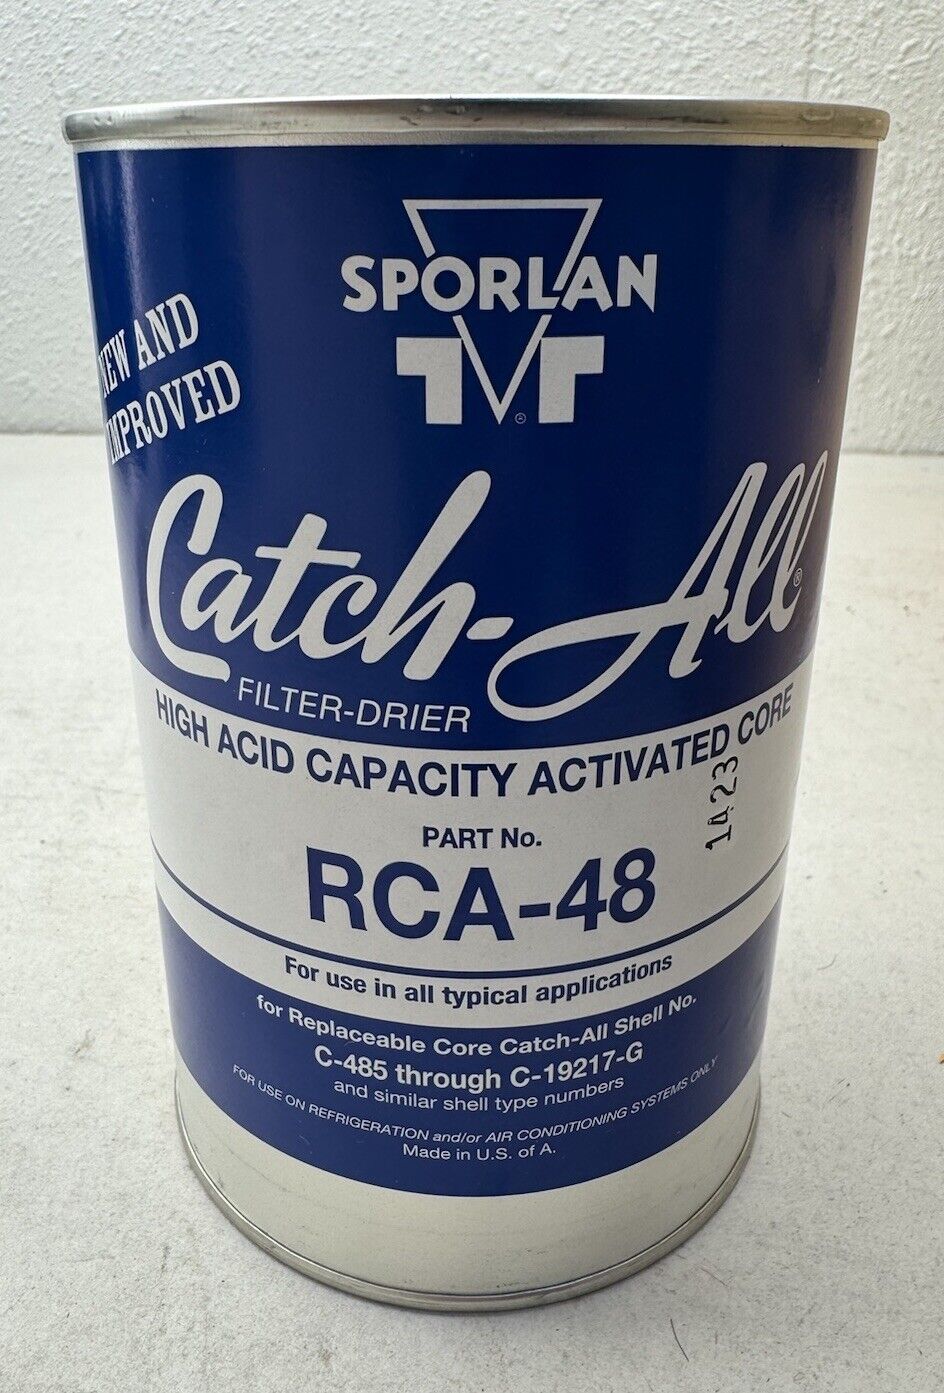 Sporlan RCA-48 Filter Drier Catch-All High Acid Capacity Activated Core SHIPSFRE